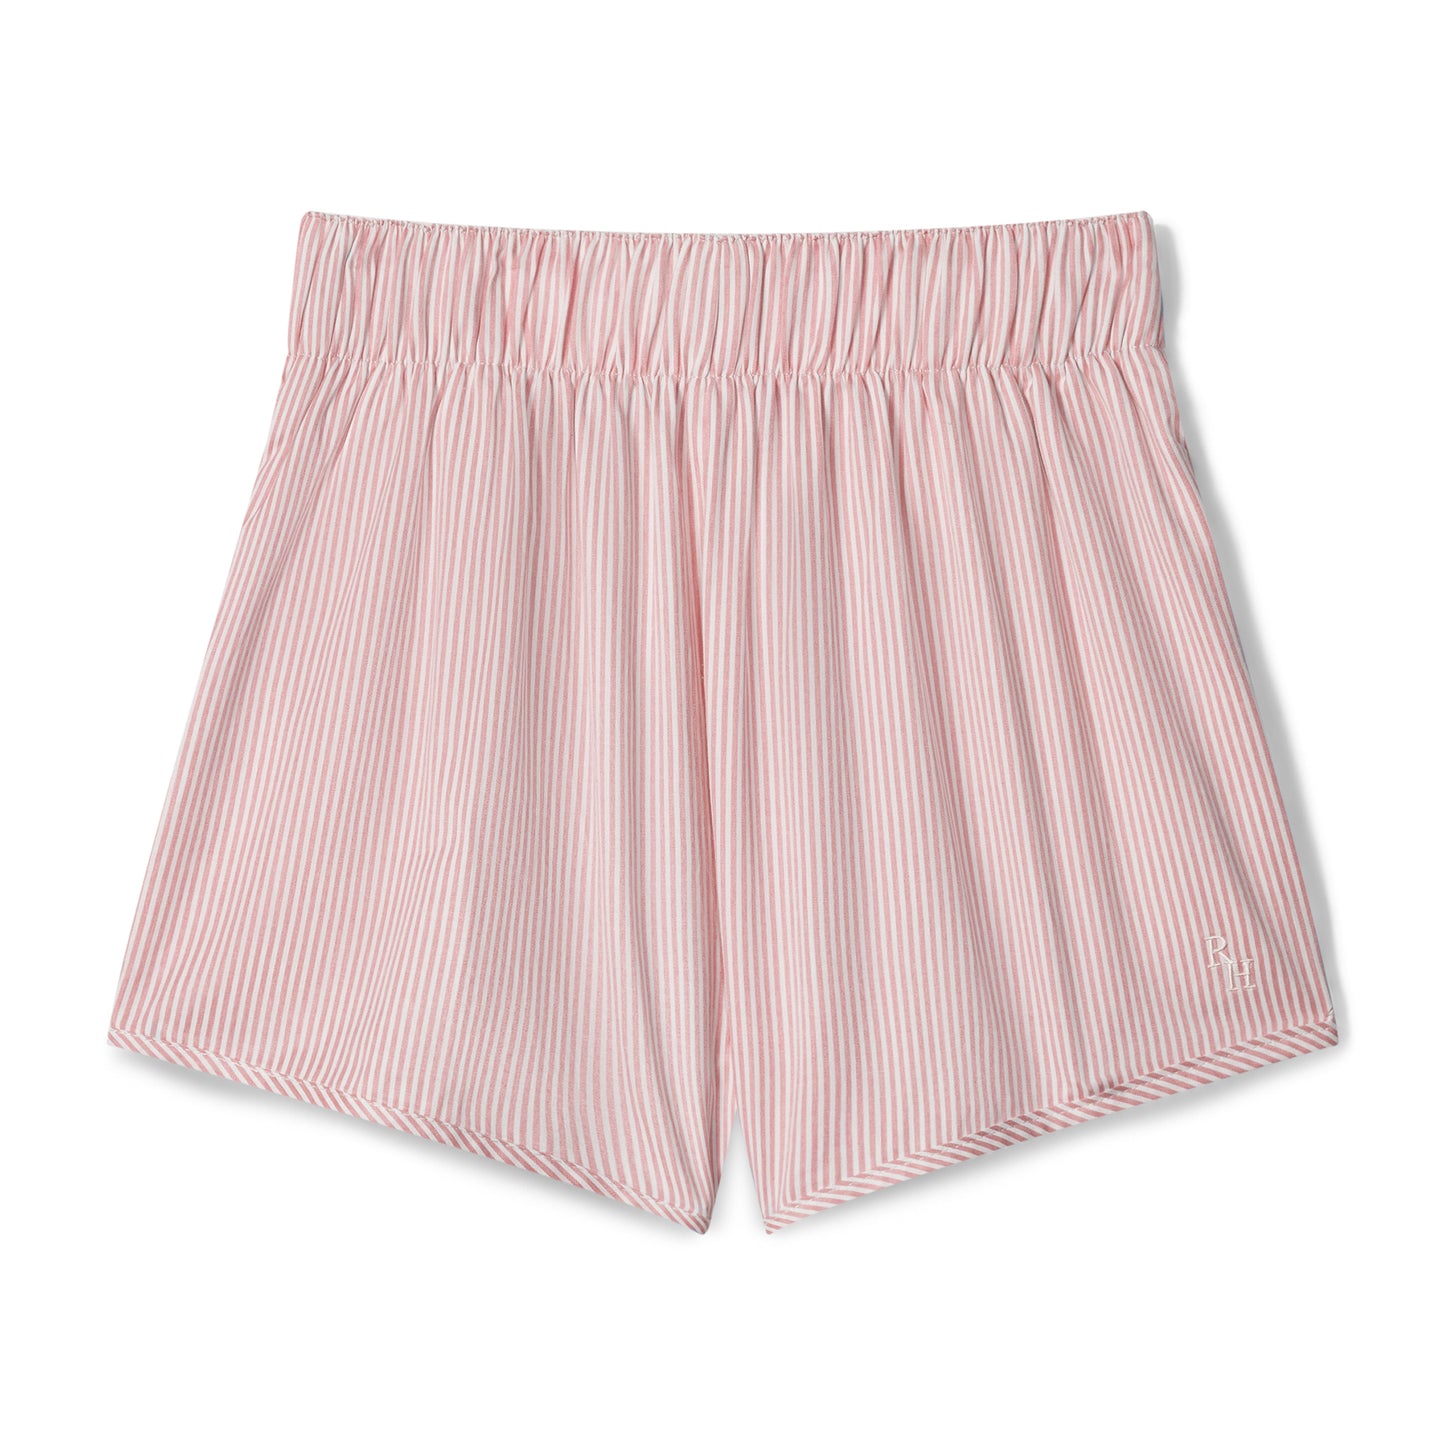 The Ferry Short in Pink